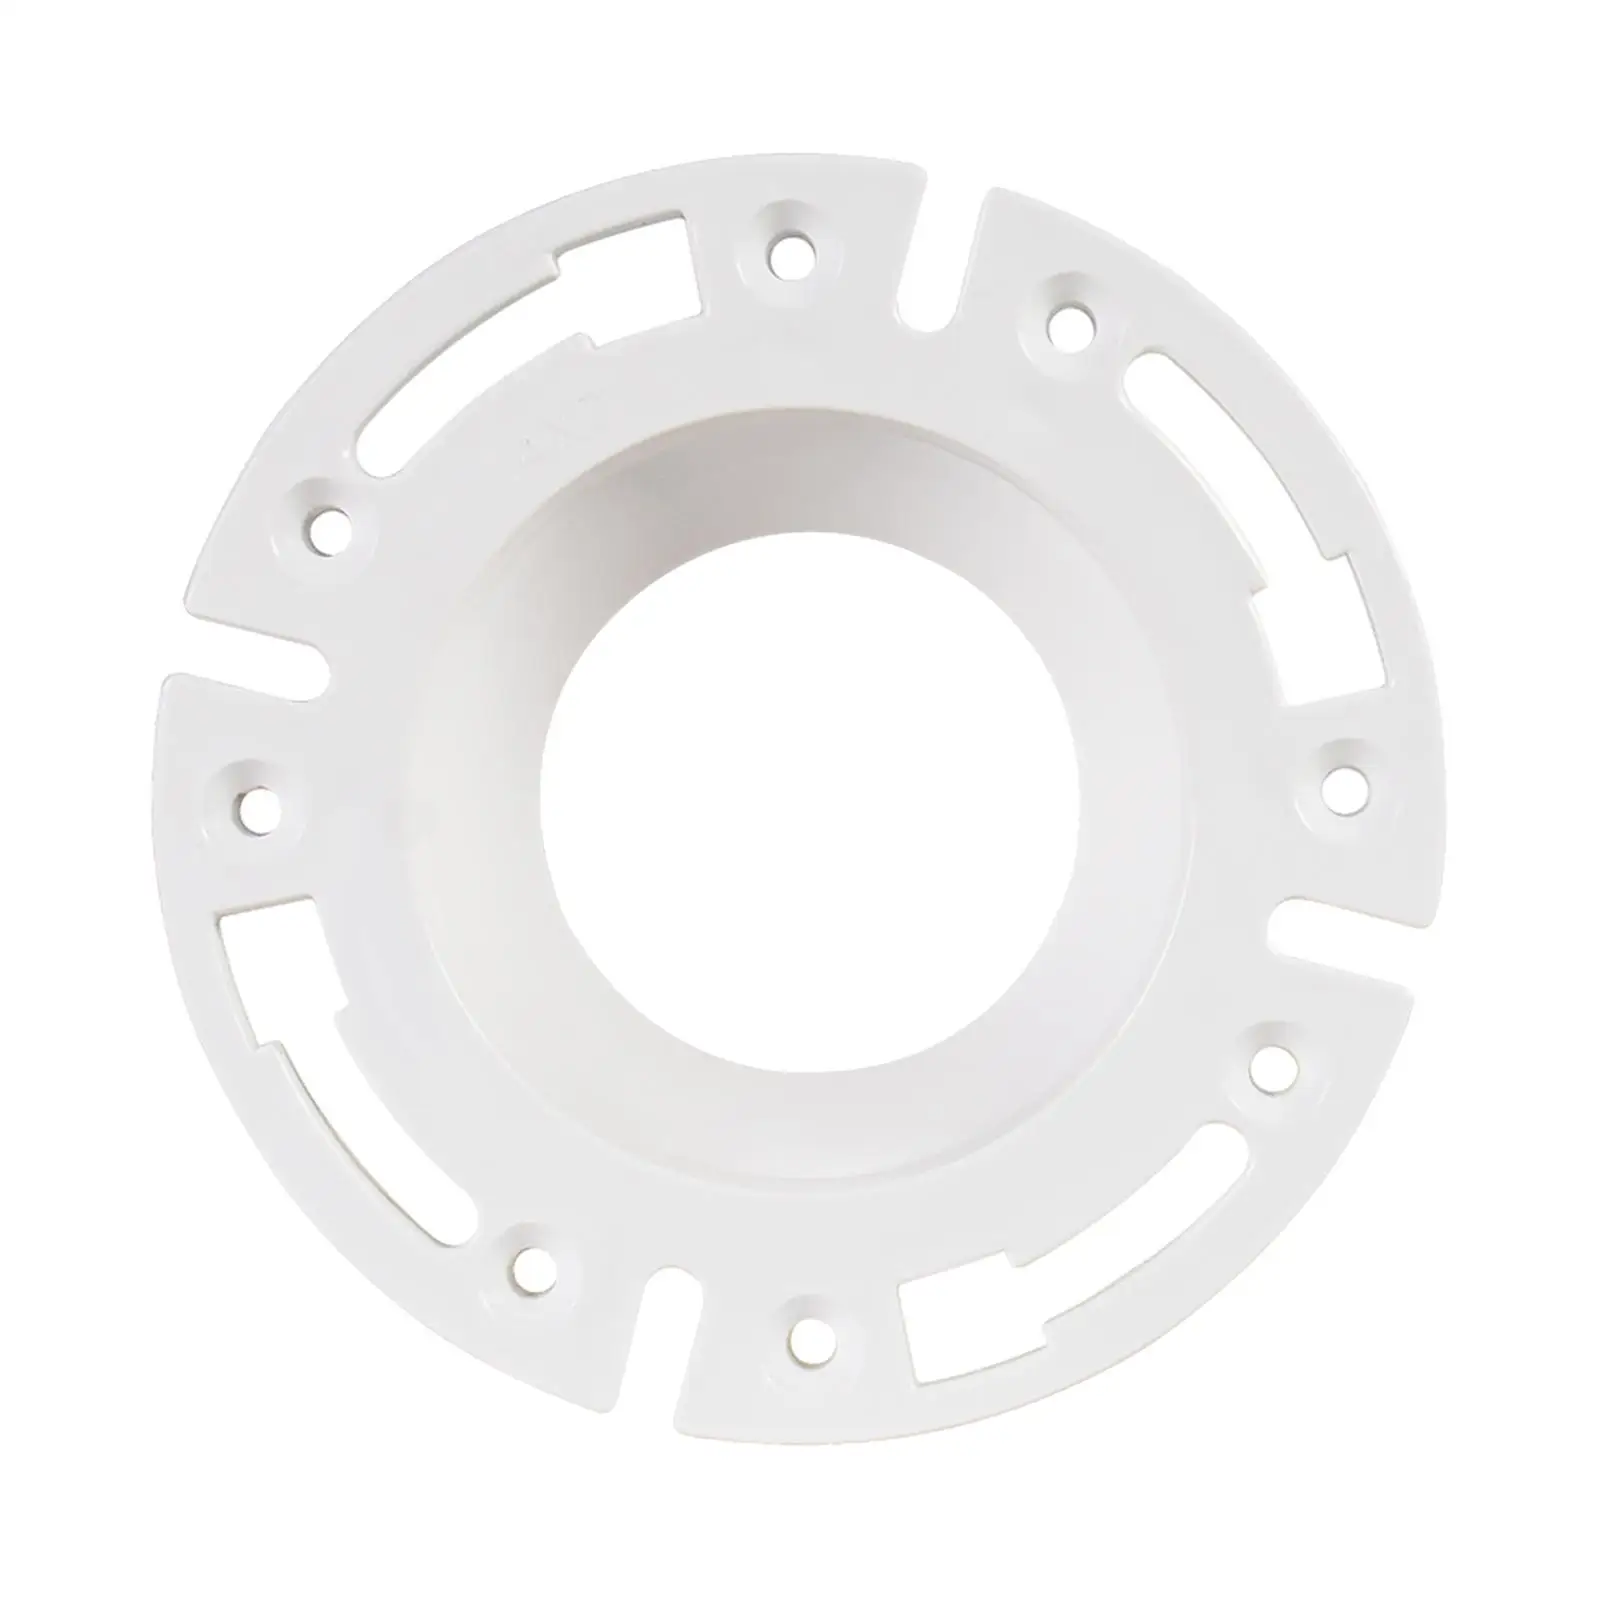 Toilet INSTALL Flange Lightweight Accessories Easy to Install Premium Spare